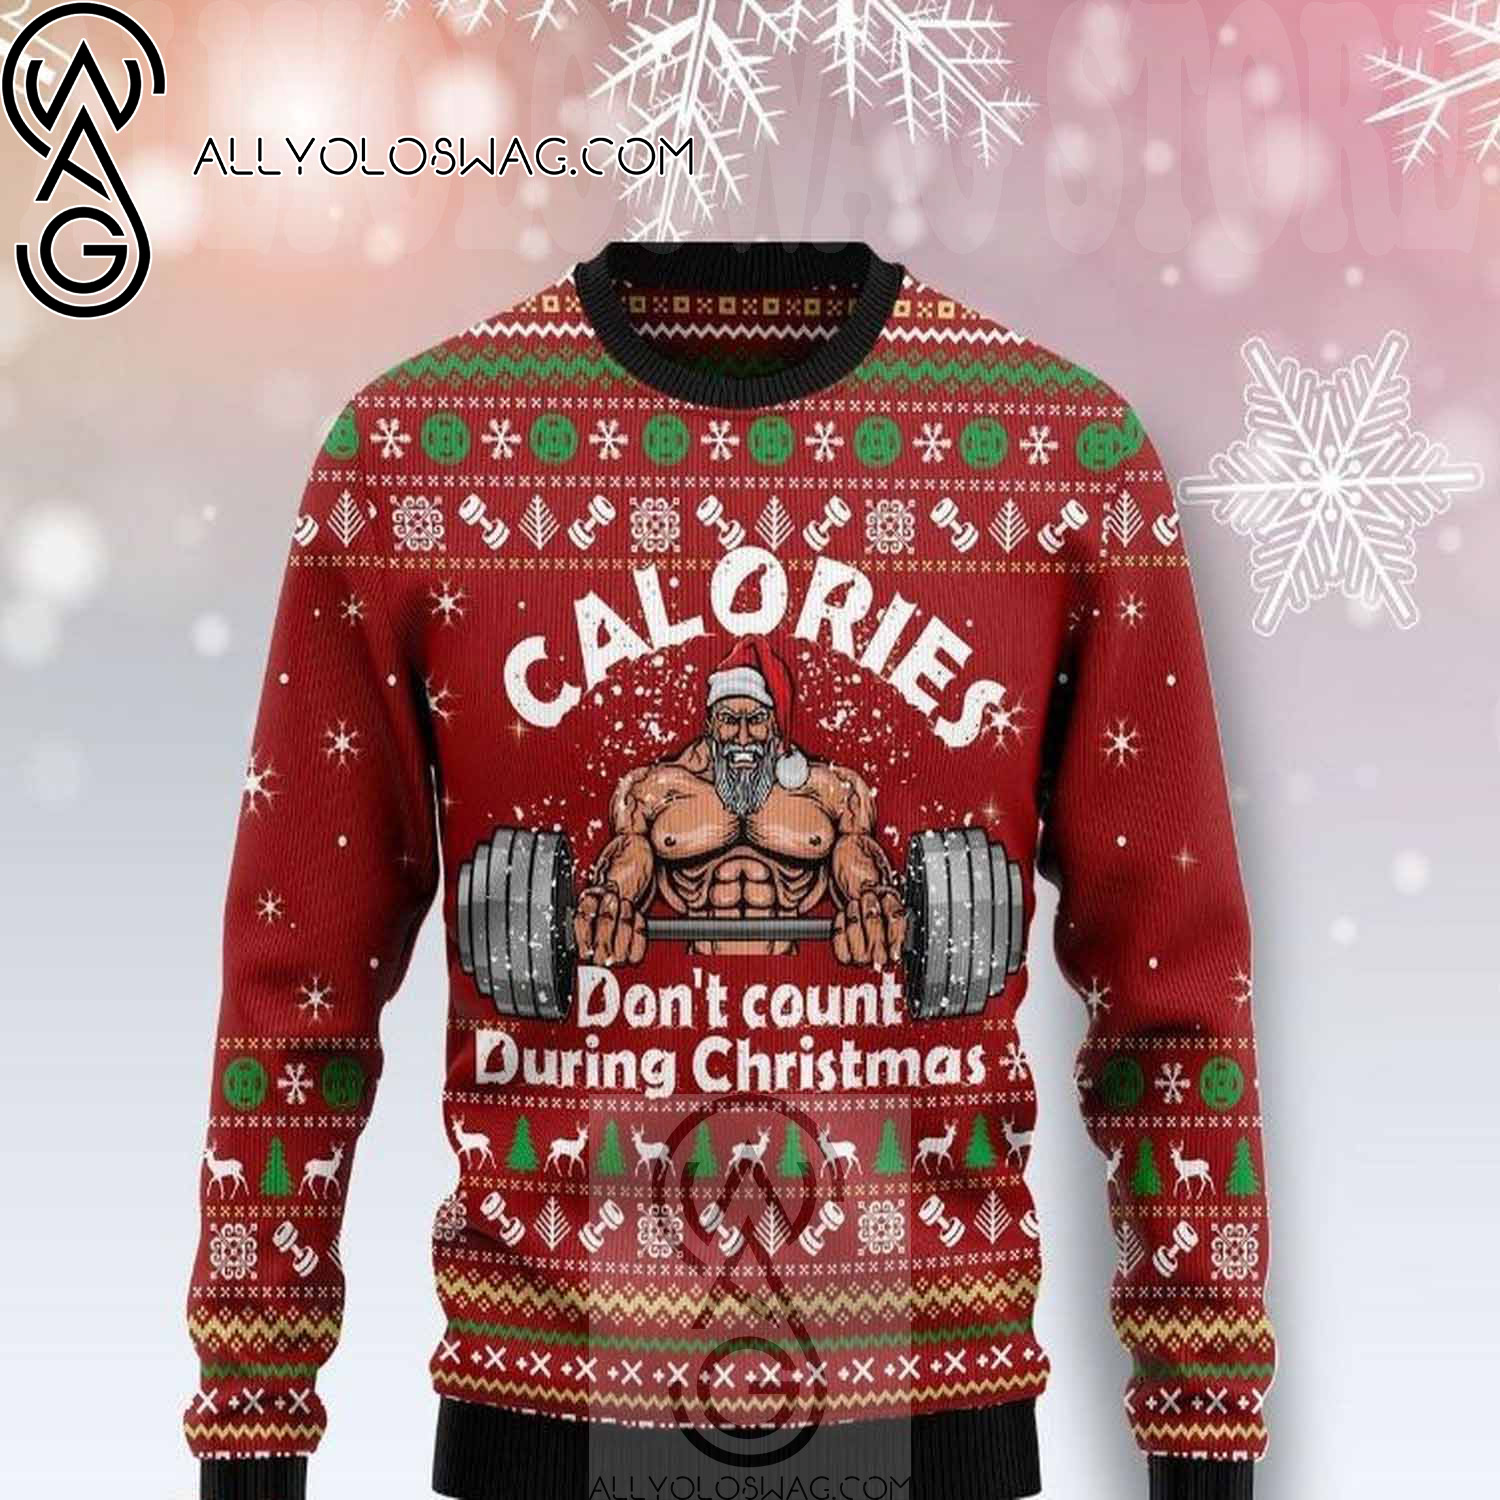 Calories Don't Count During Christmas Ugly Christmas Sweater